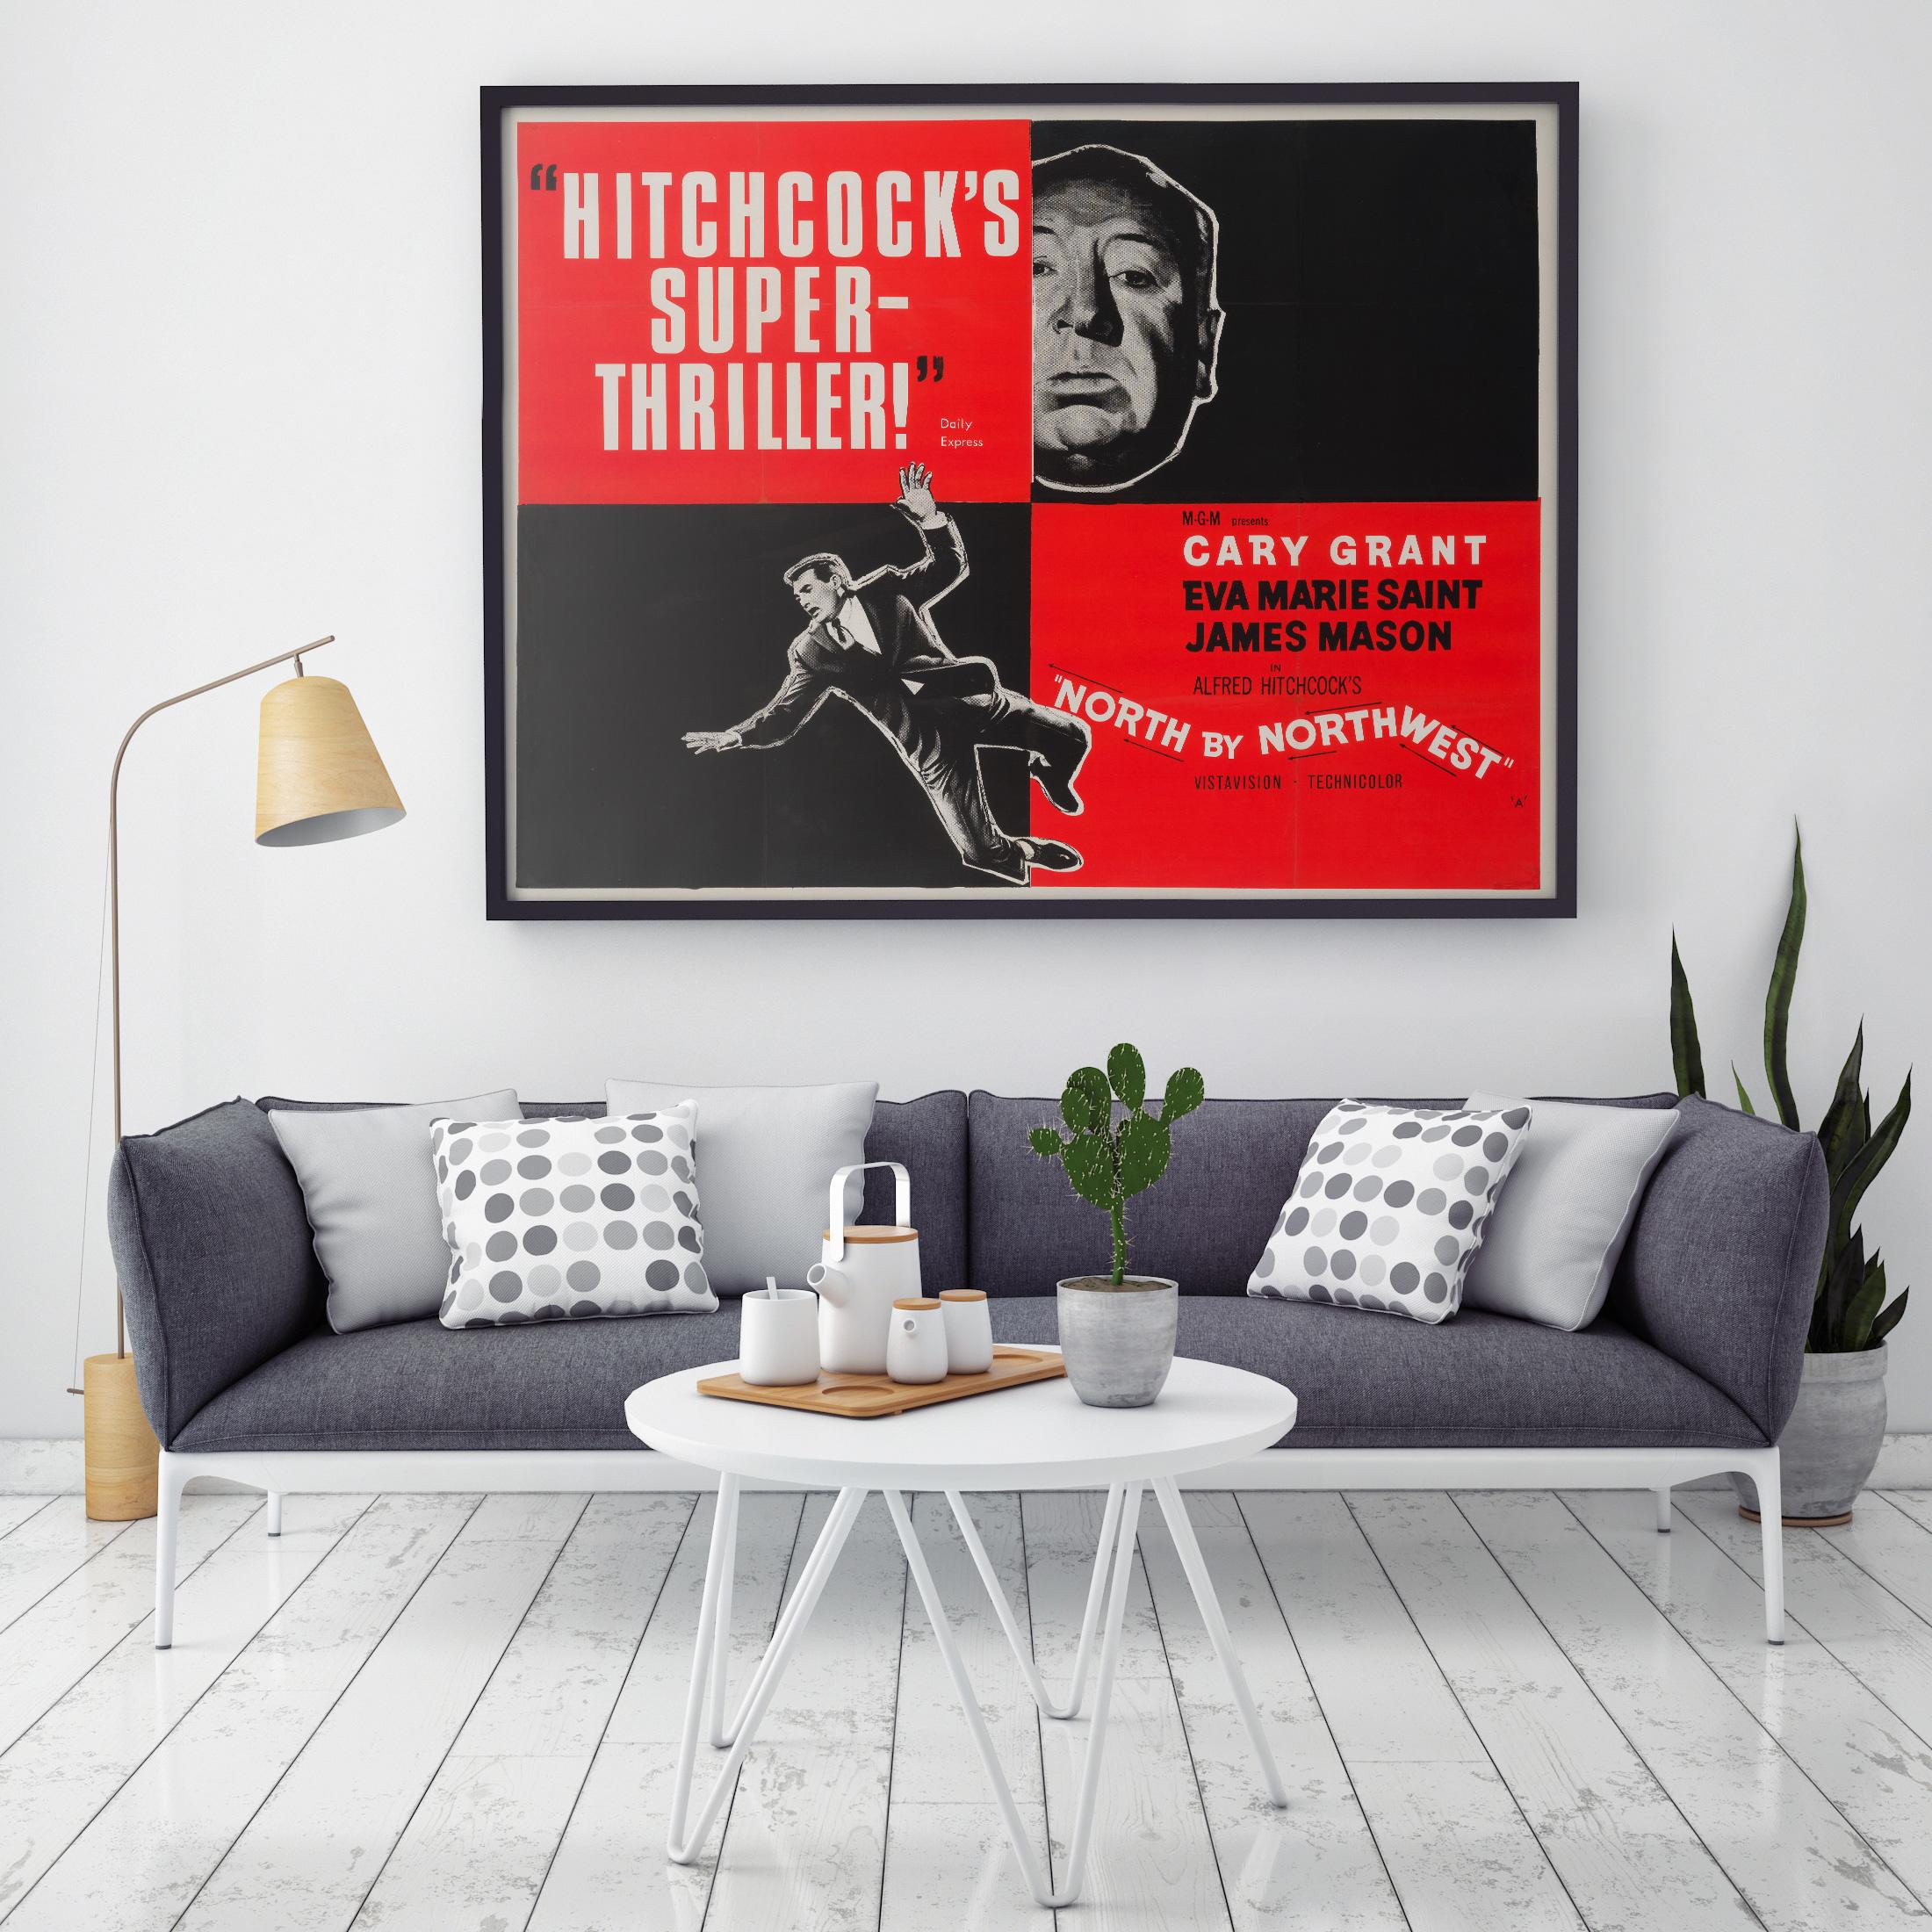 Looking for a very special poster for a special someone... head North by Northwest! 'Hitchcock's Super-Thriller!'

In North by Northwest a New York City advertising executive goes on the run after being mistaken for a government agent by a group of